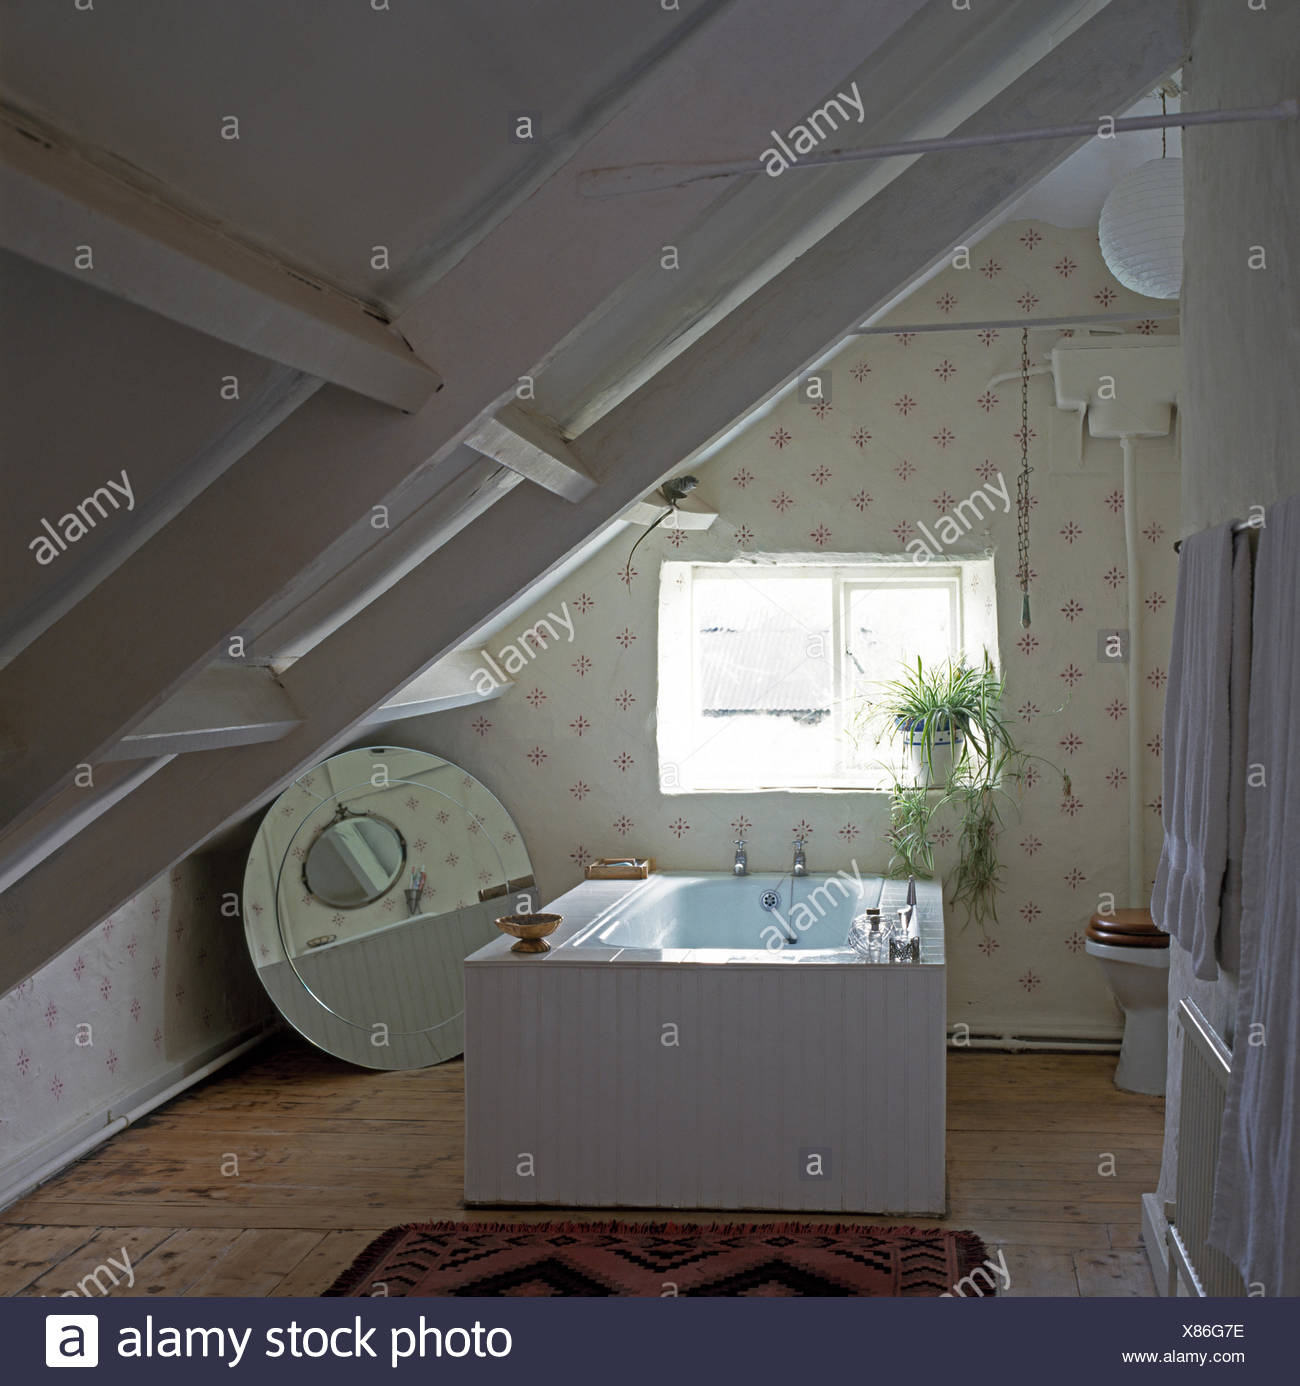 White Painted Beams In Attic Bathroom With A Central Bath And A